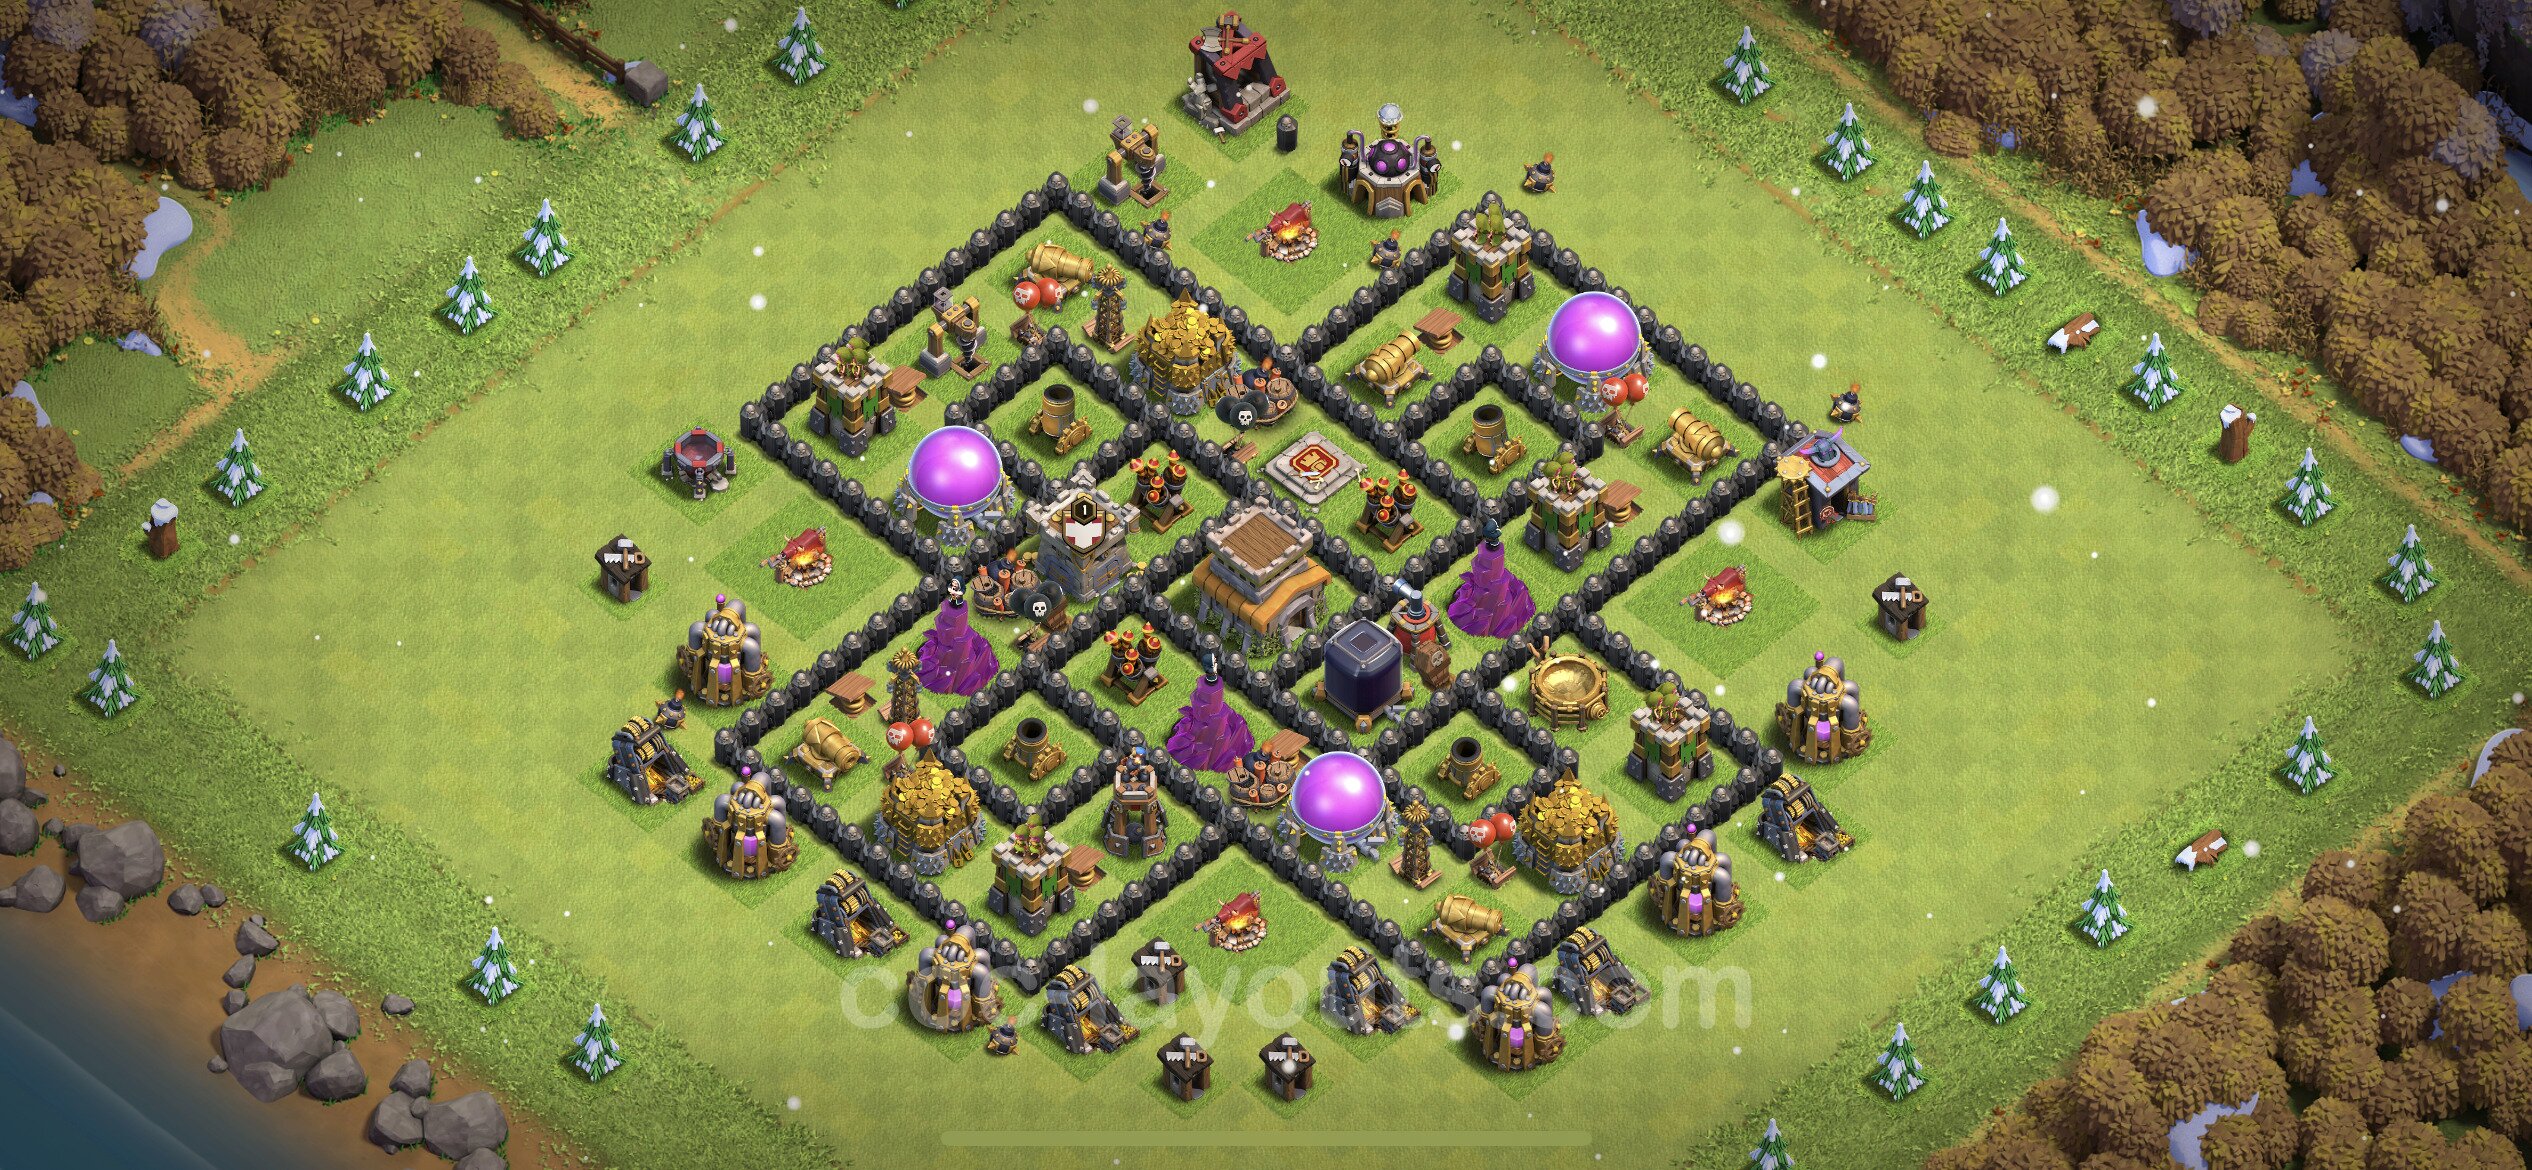 Trophy (Defense) Base TH8 with Link, Anti Everything - Clash of Clans - Tow...